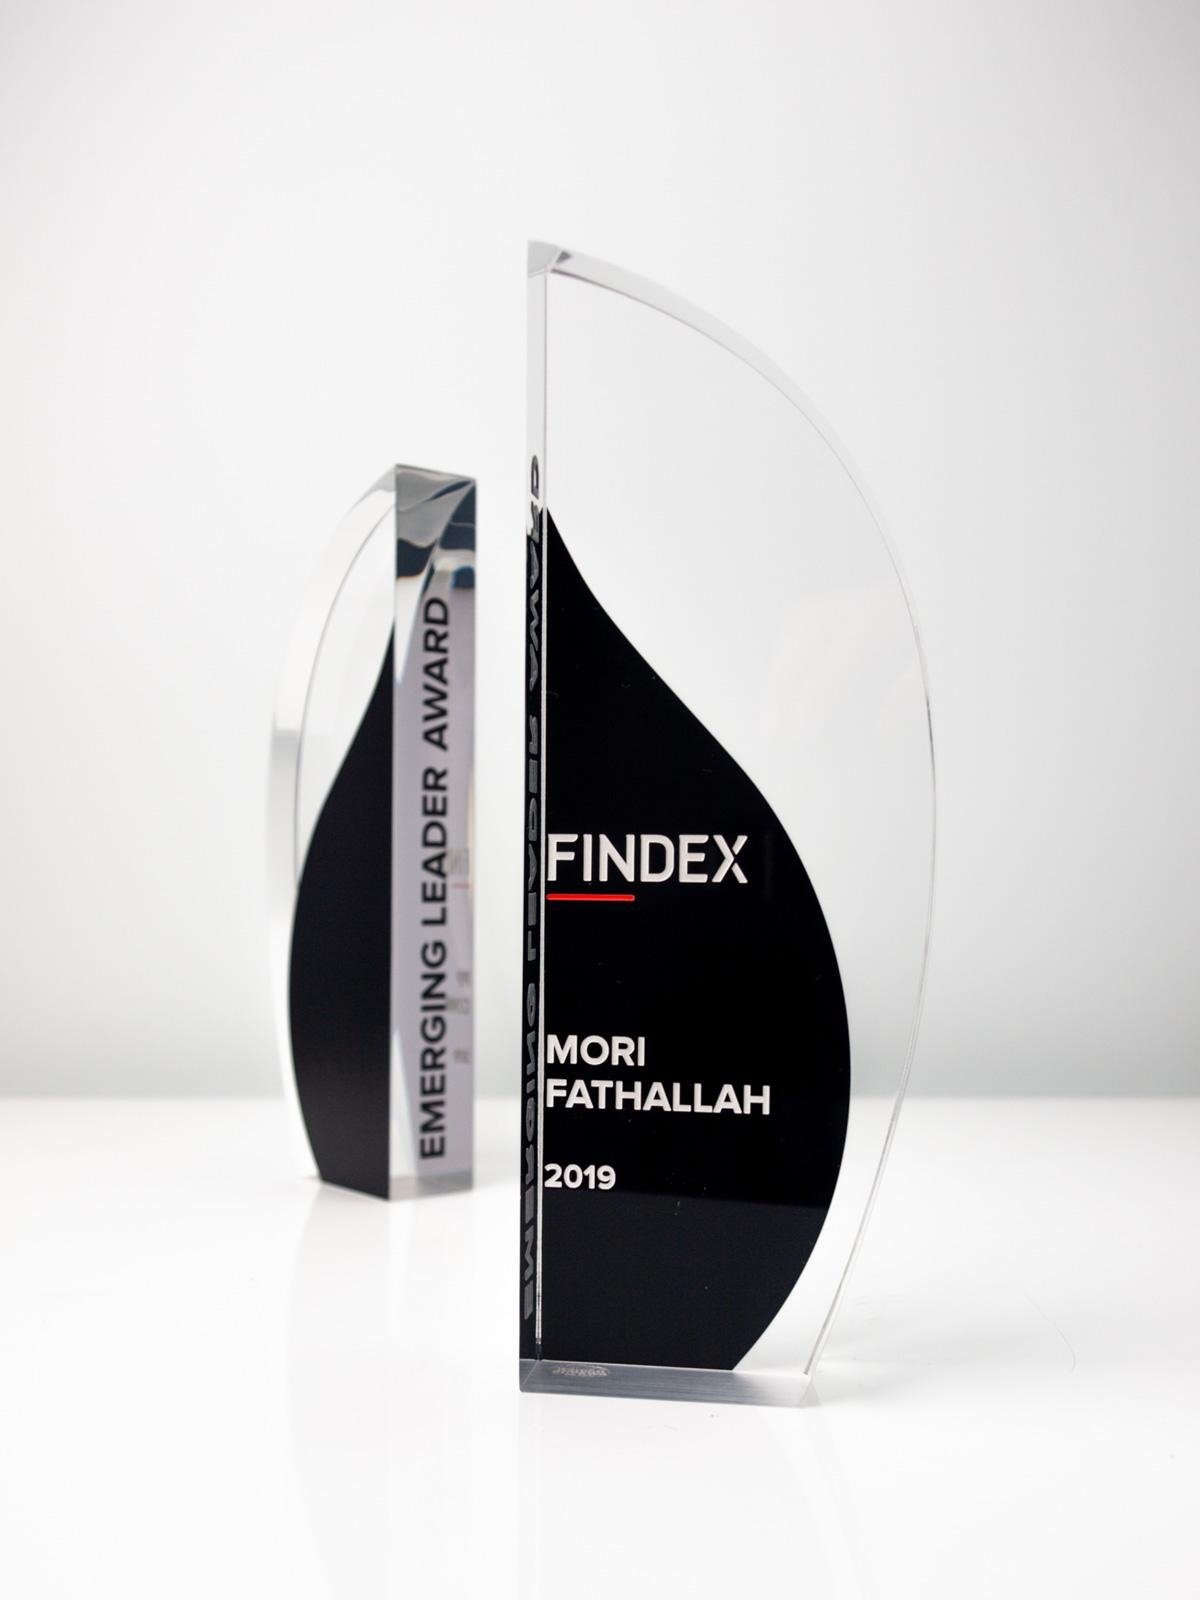 Acrylic Trophy Plaques, Corporate Awards